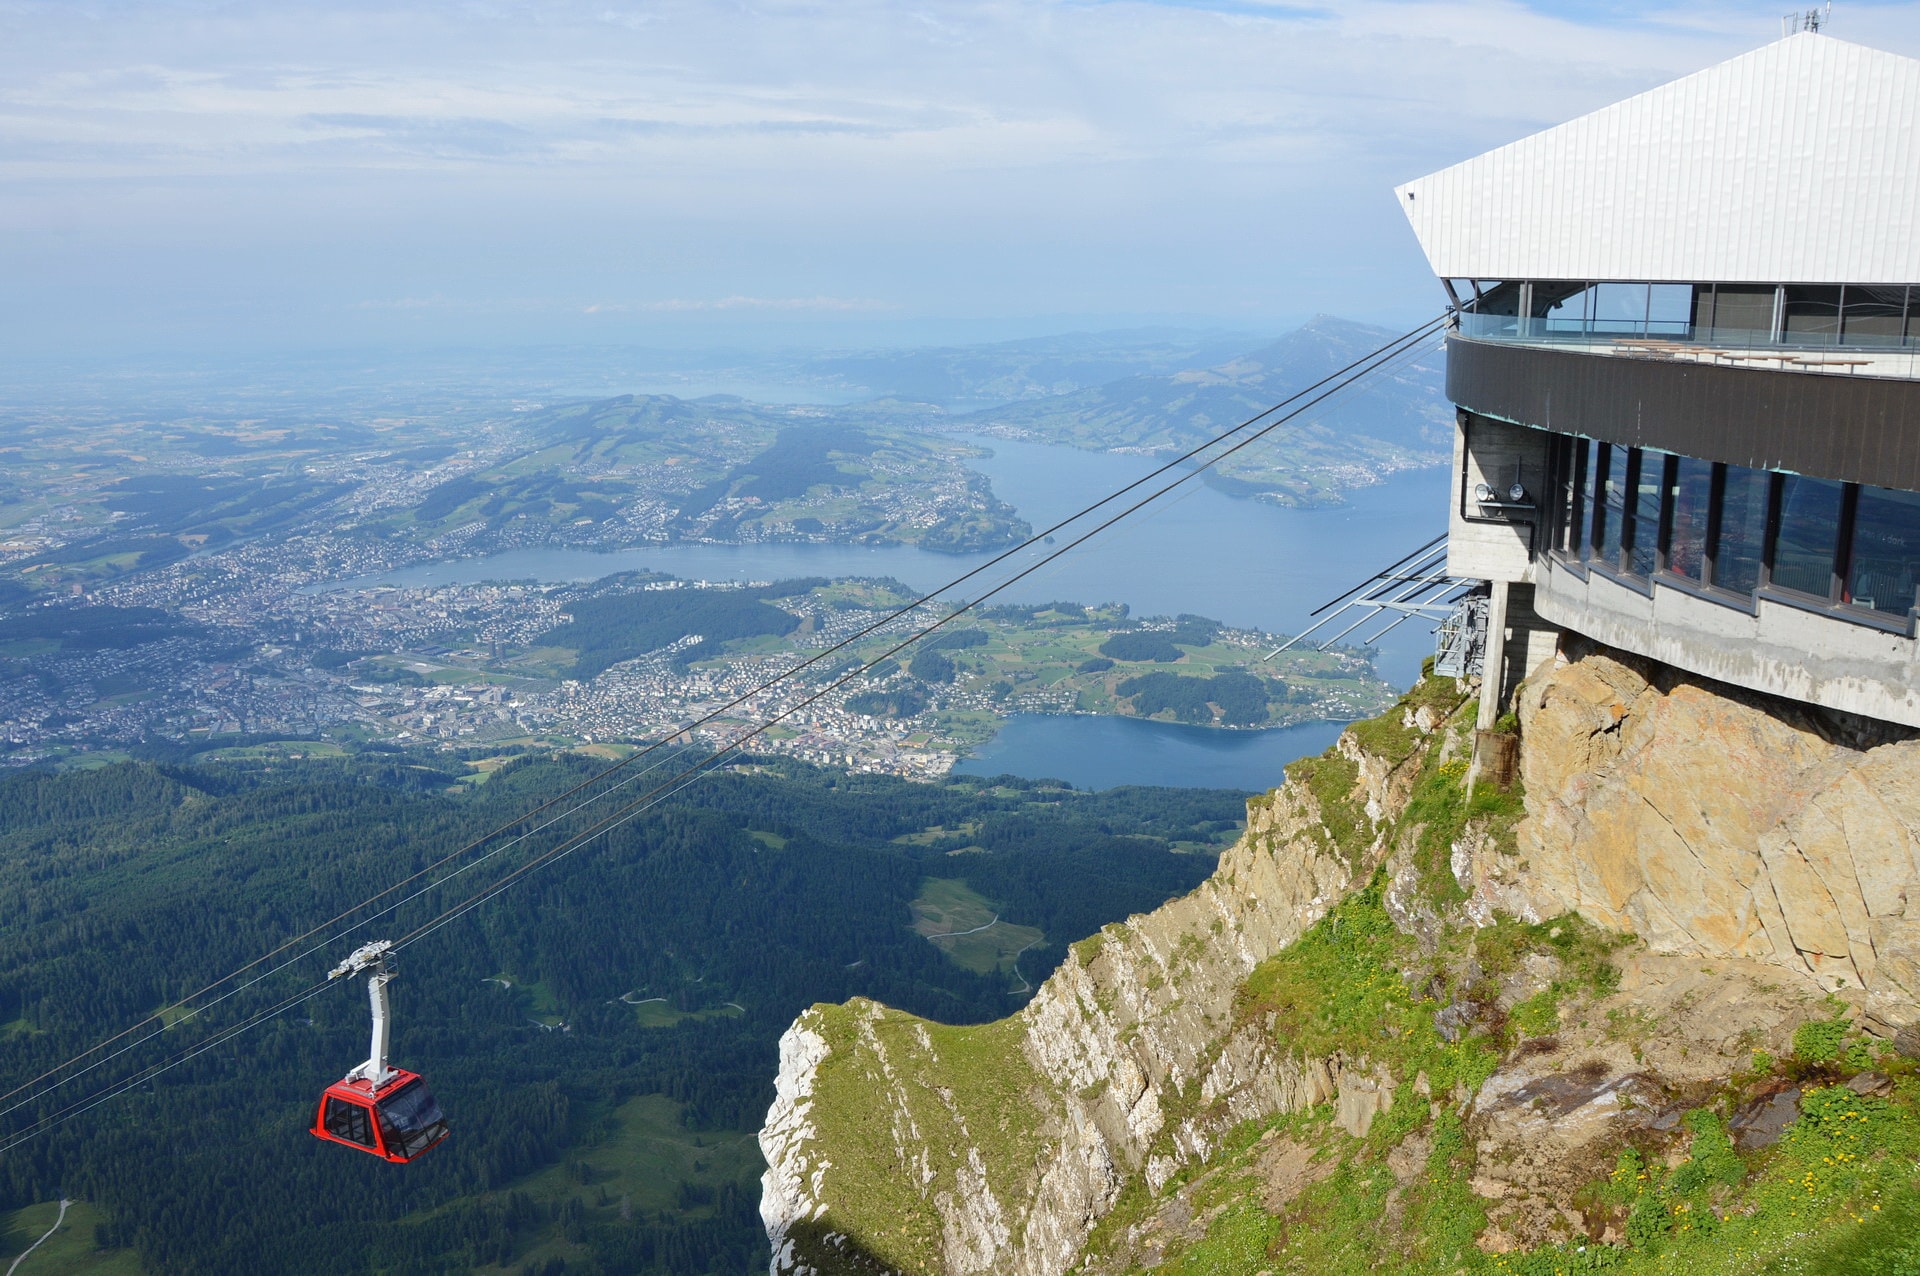 Cableway station on the top of Mt. Pilatus